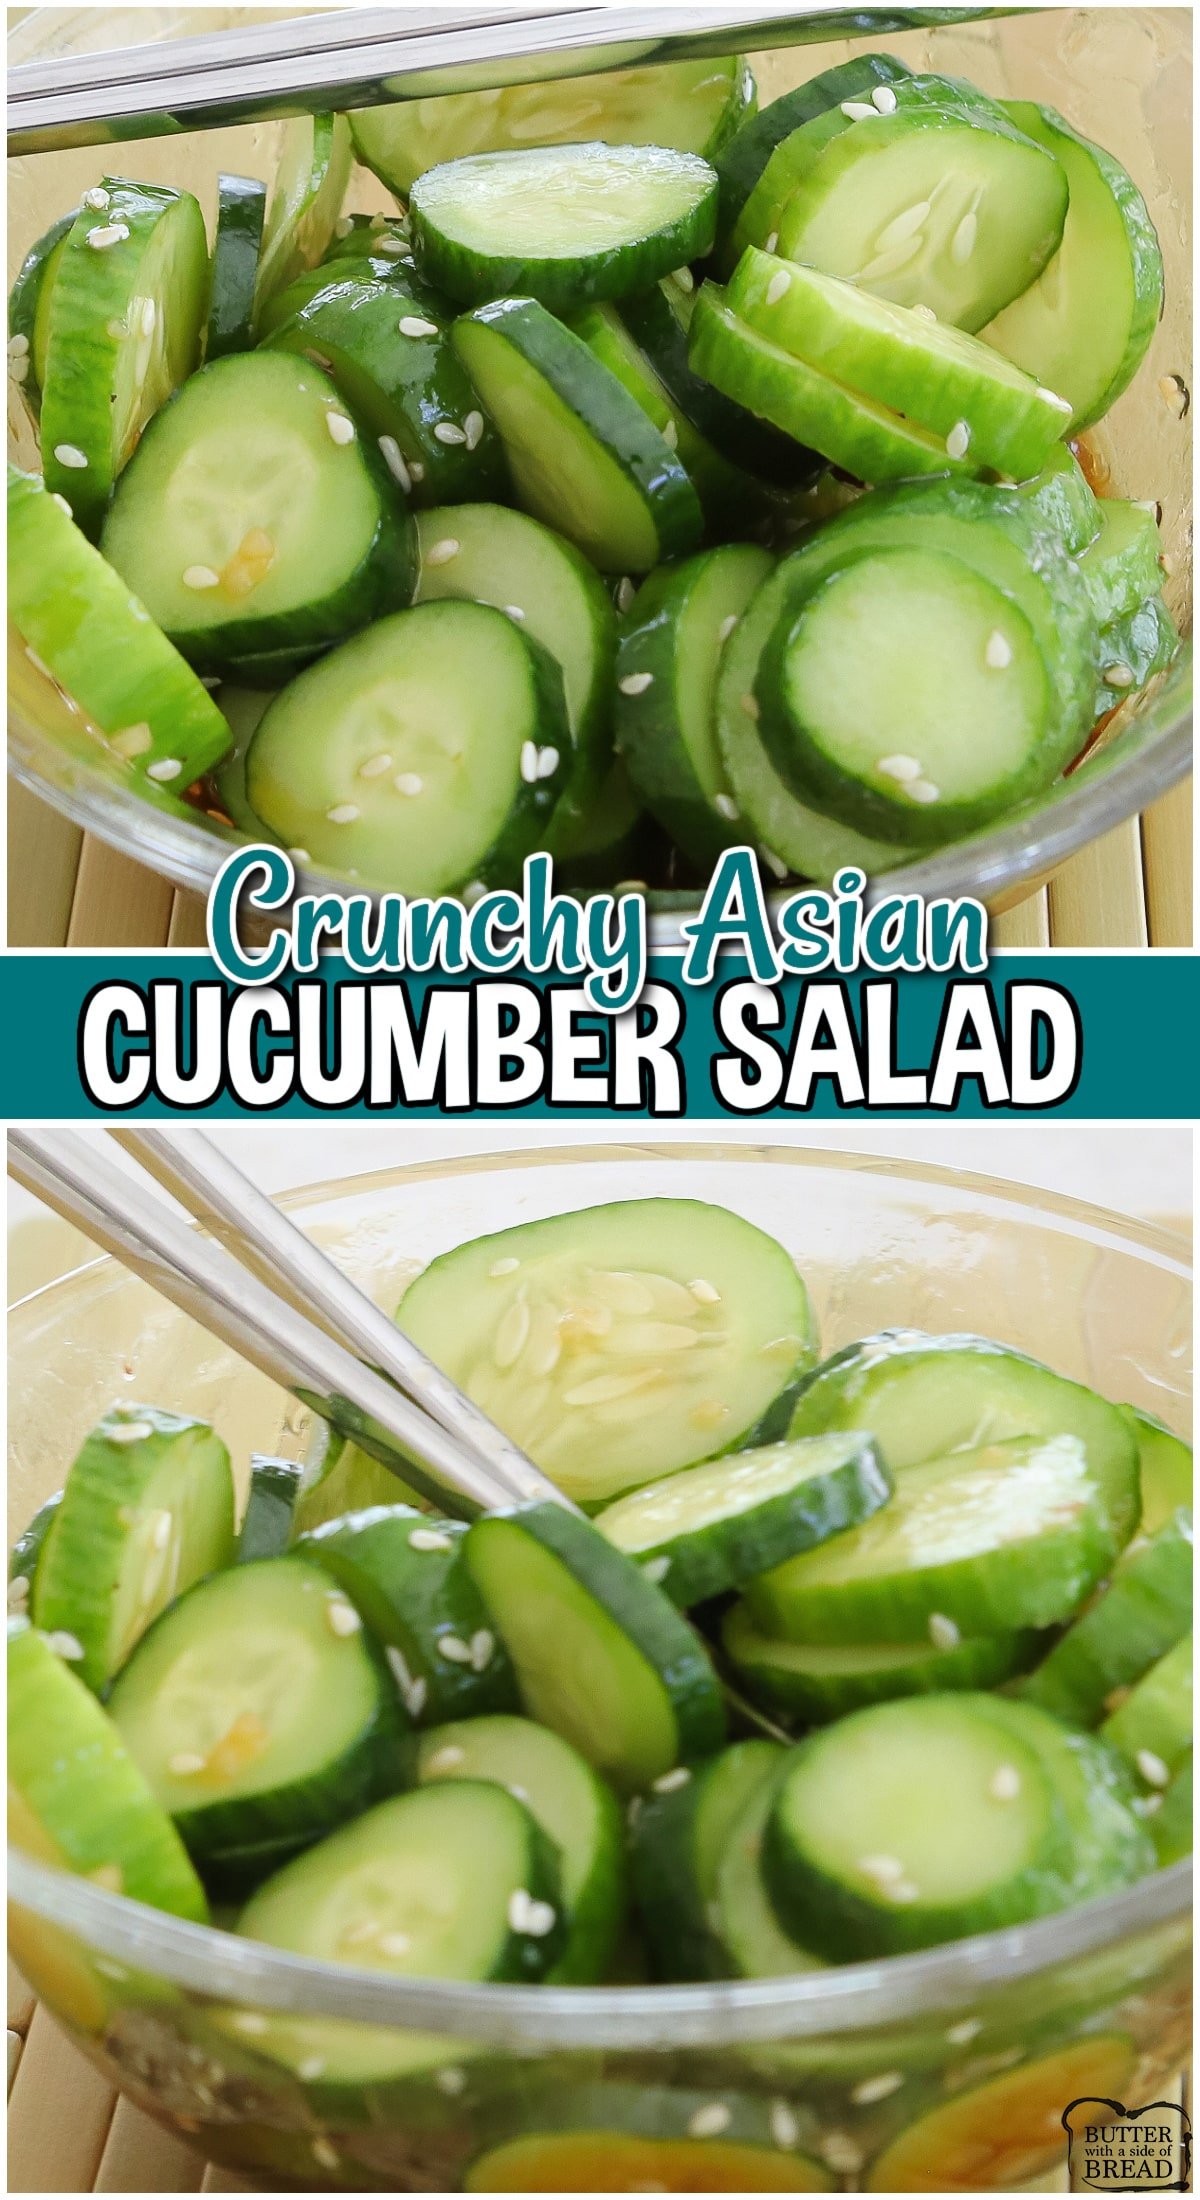 Crunchy Asian Cucumber Salad made easy in minutes with fantastic tangy flavors everyone enjoys! Easy salad with fresh cucumbers tossed with a simple soy sauce dressing sweetened with maple syrup. Try it!